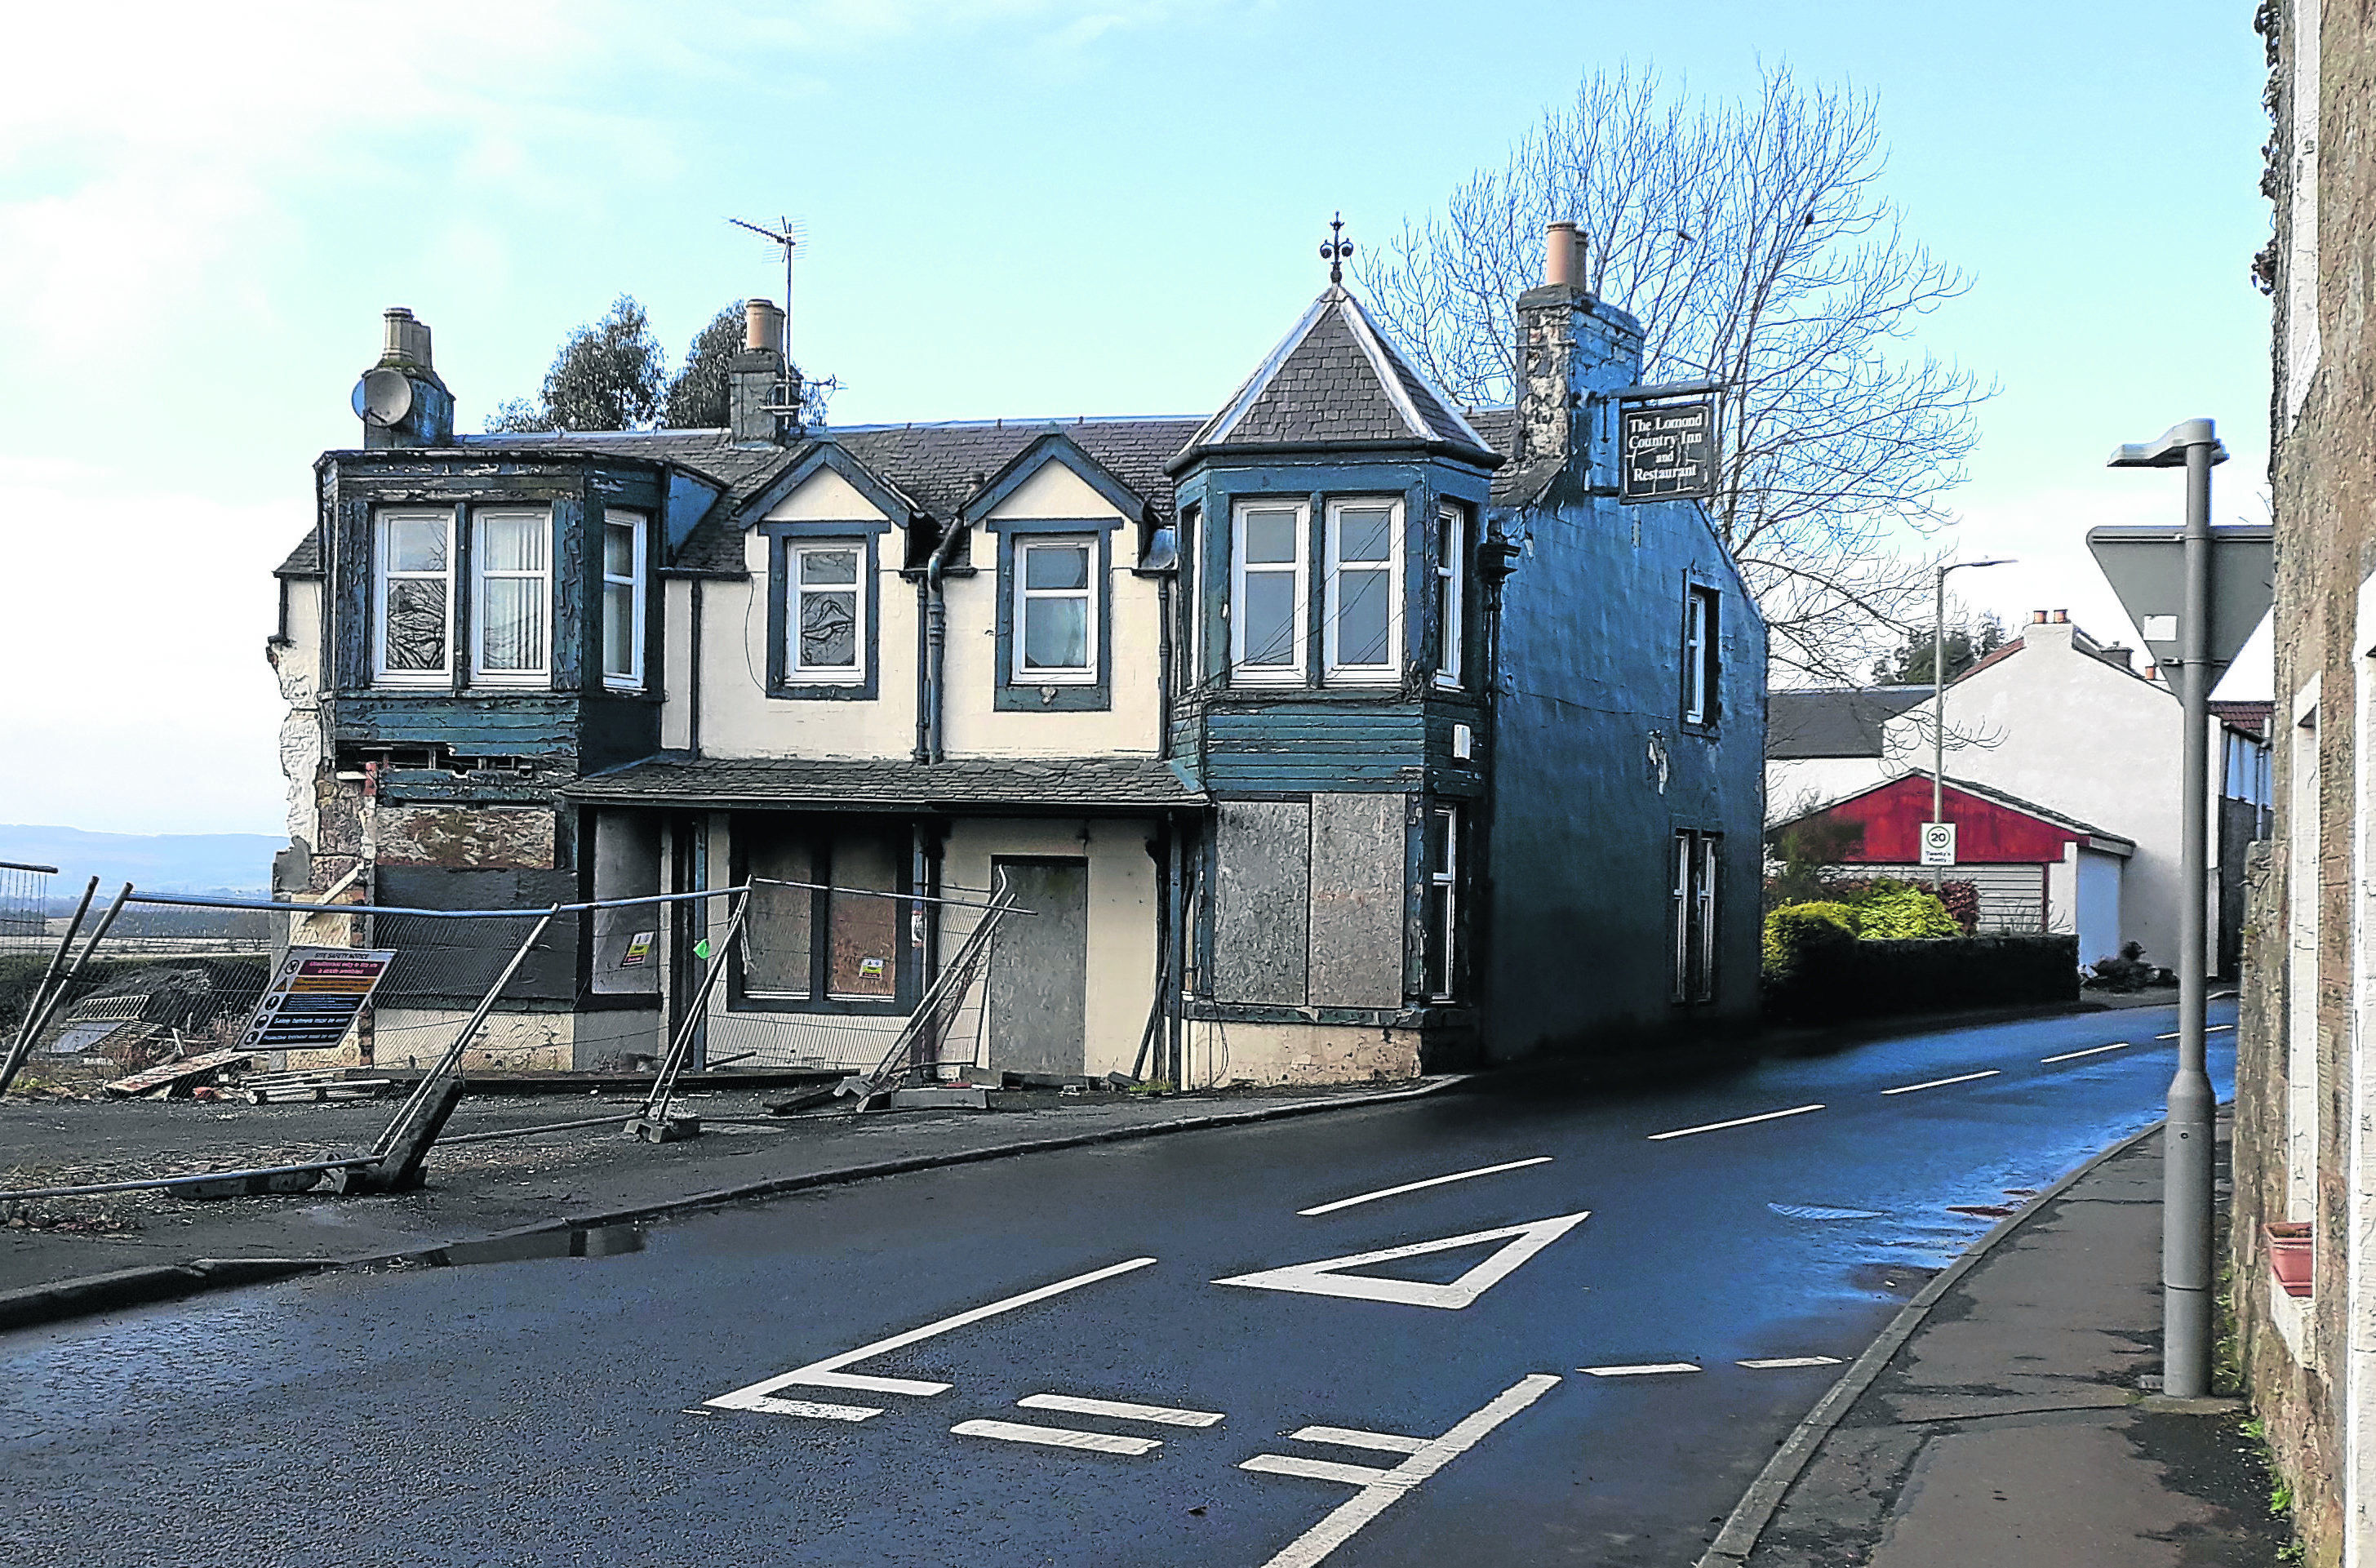 The Lomond Hotel in Kinnesswood has fallen into a sorry state, beyond repair, claim developers